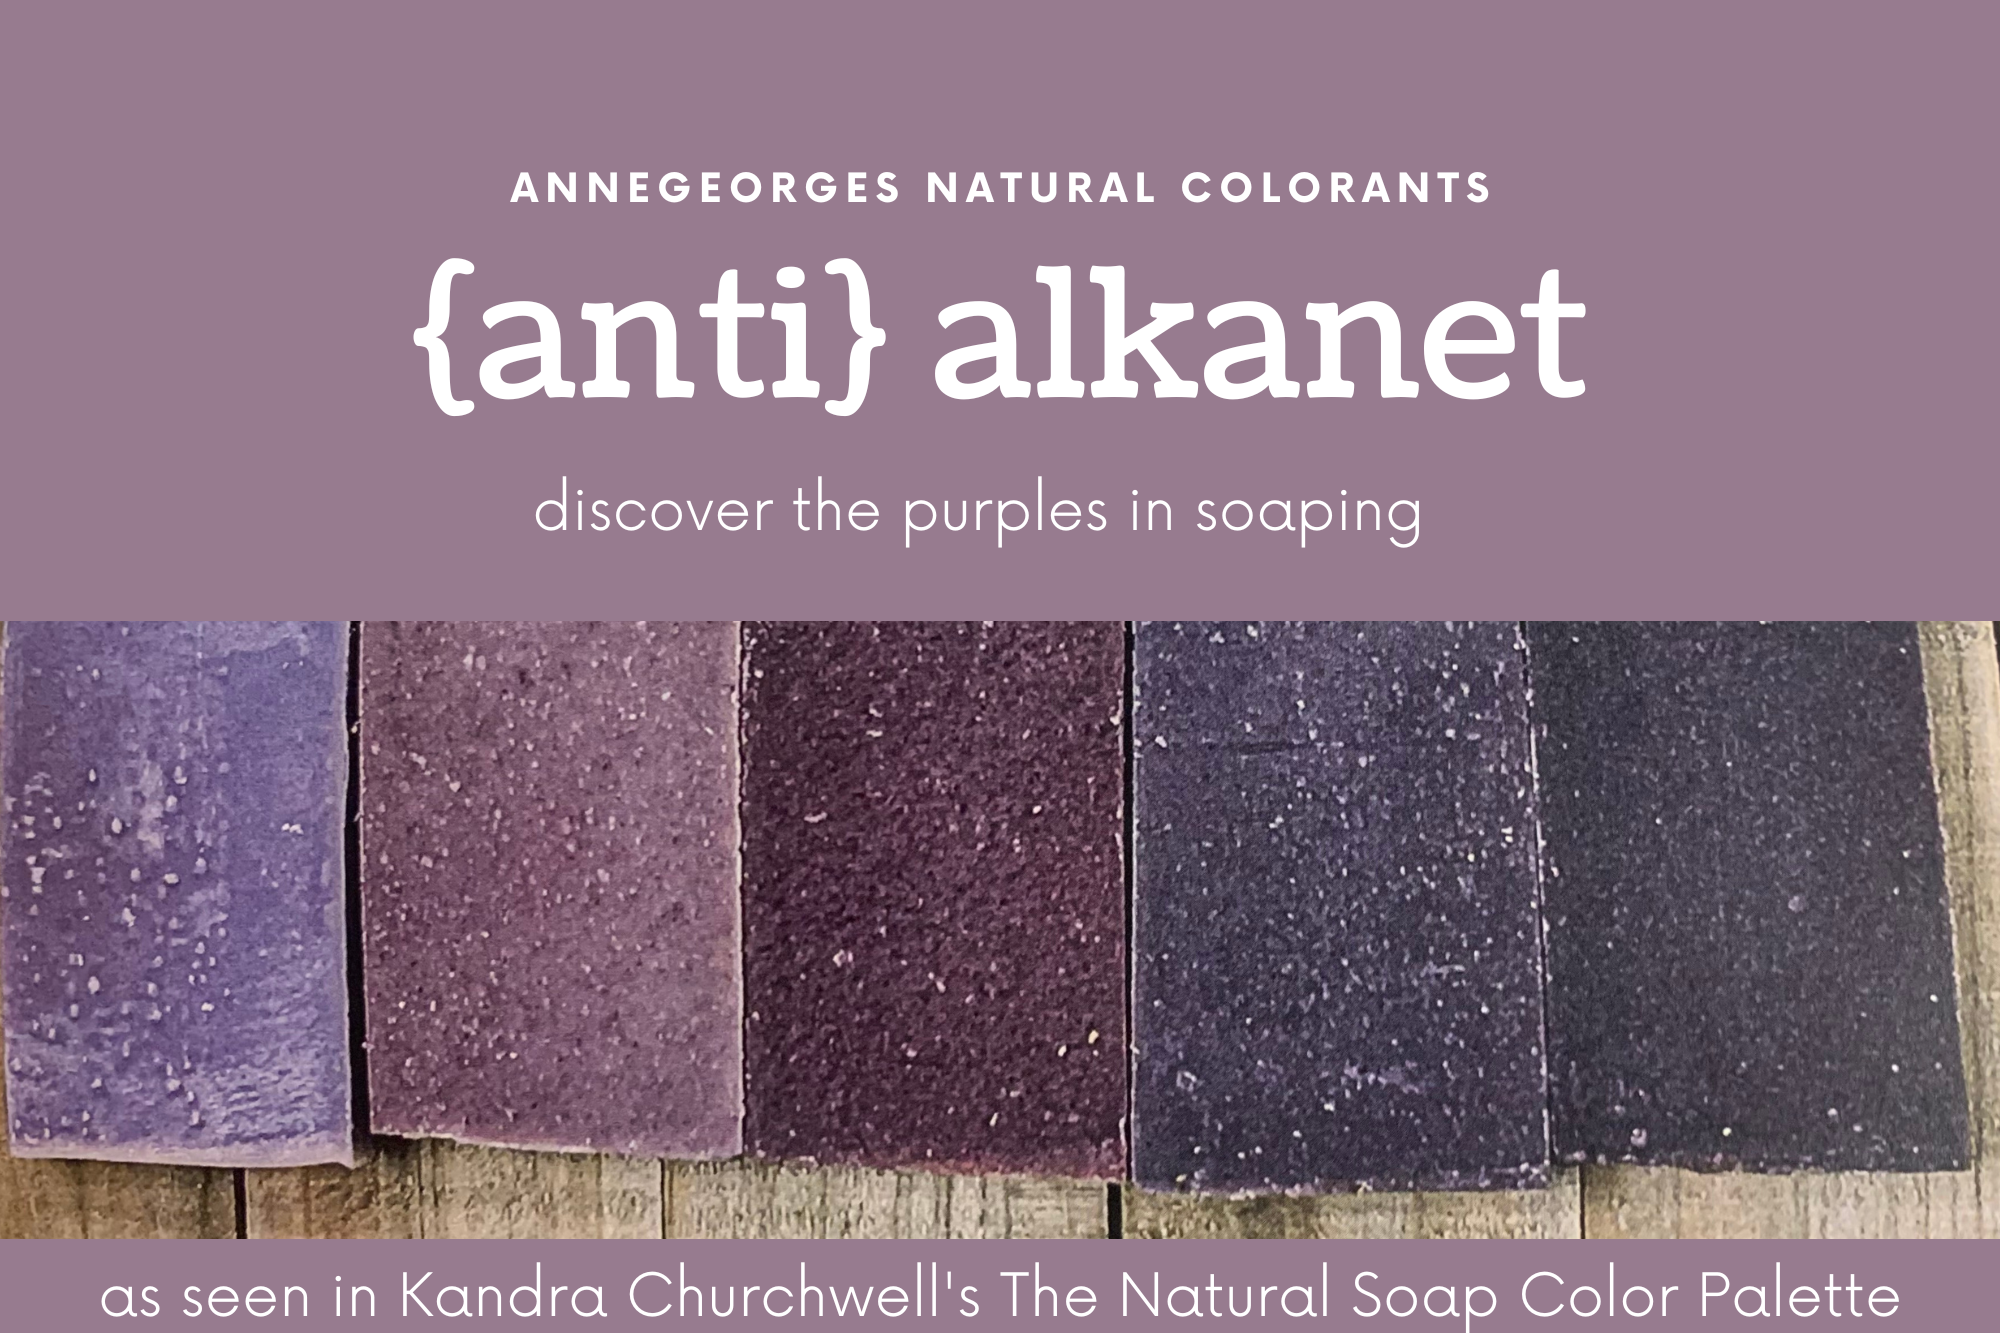 Anti-Alkanet The Purples is a set of natural colorants that make Purpl –  AnneGeorges